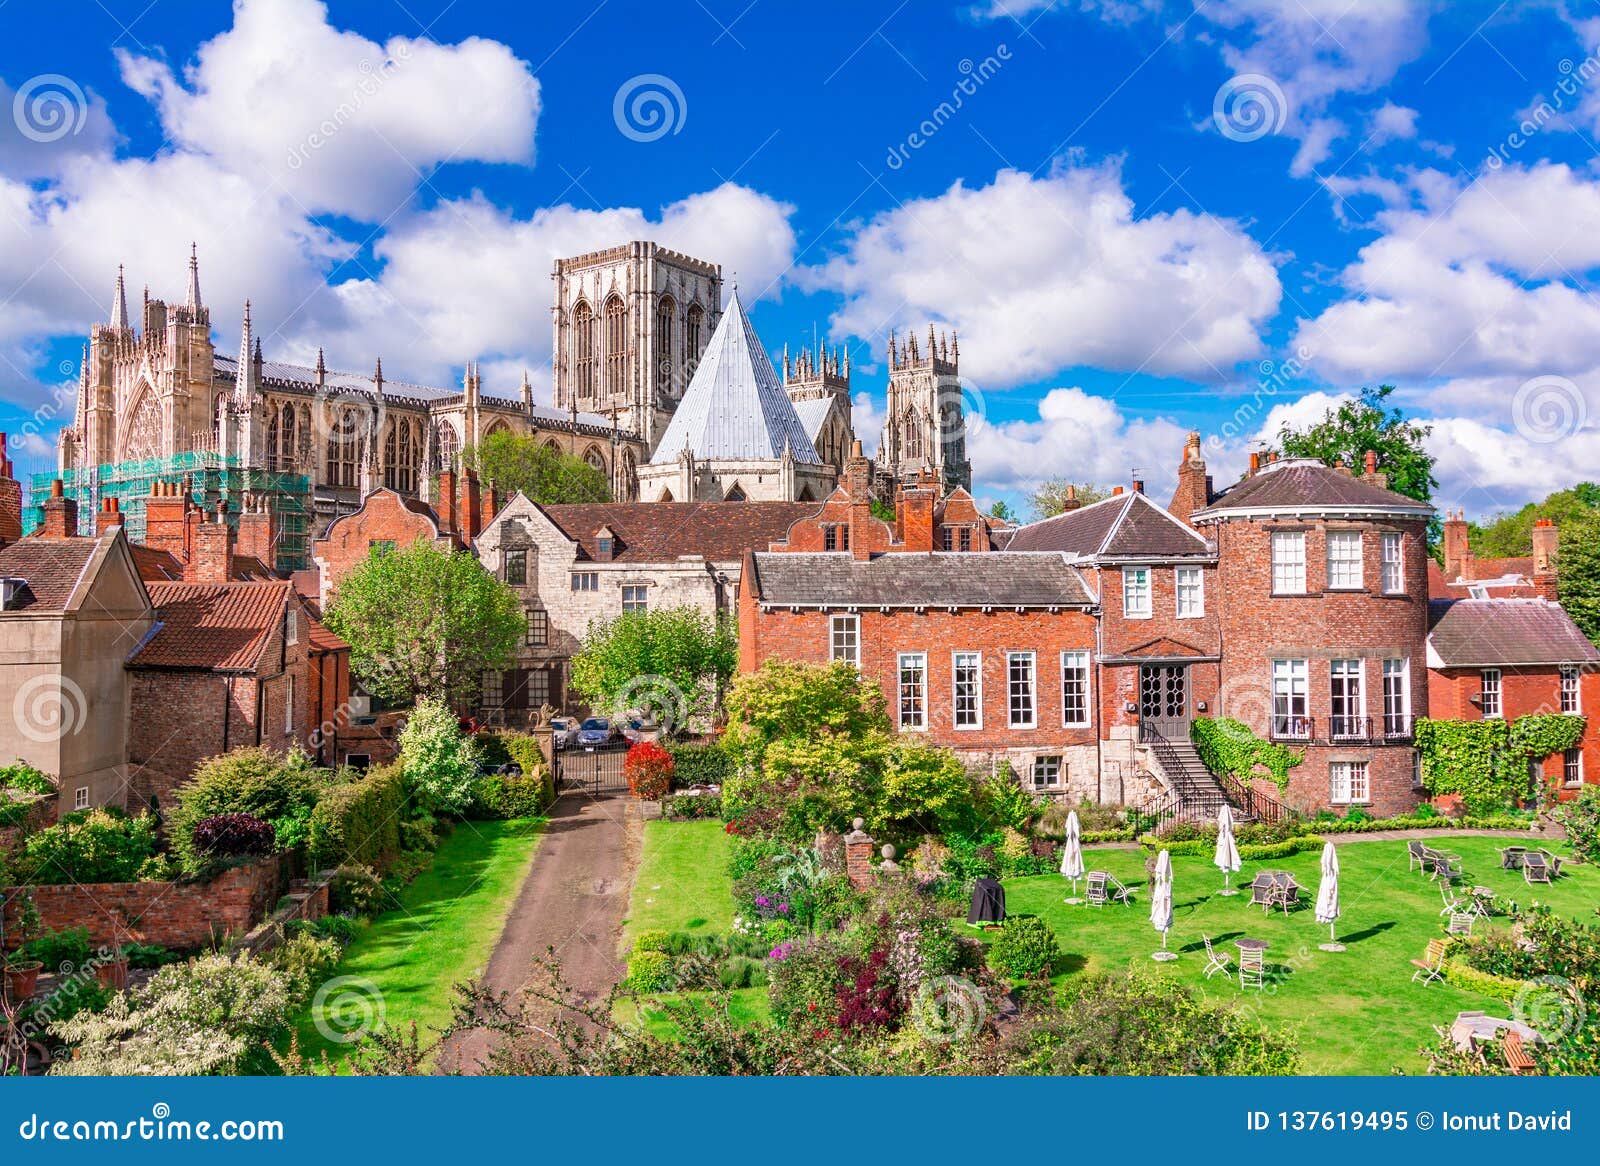 york, england, united kingdom: york minster, one of the largest of its kind in northern europe